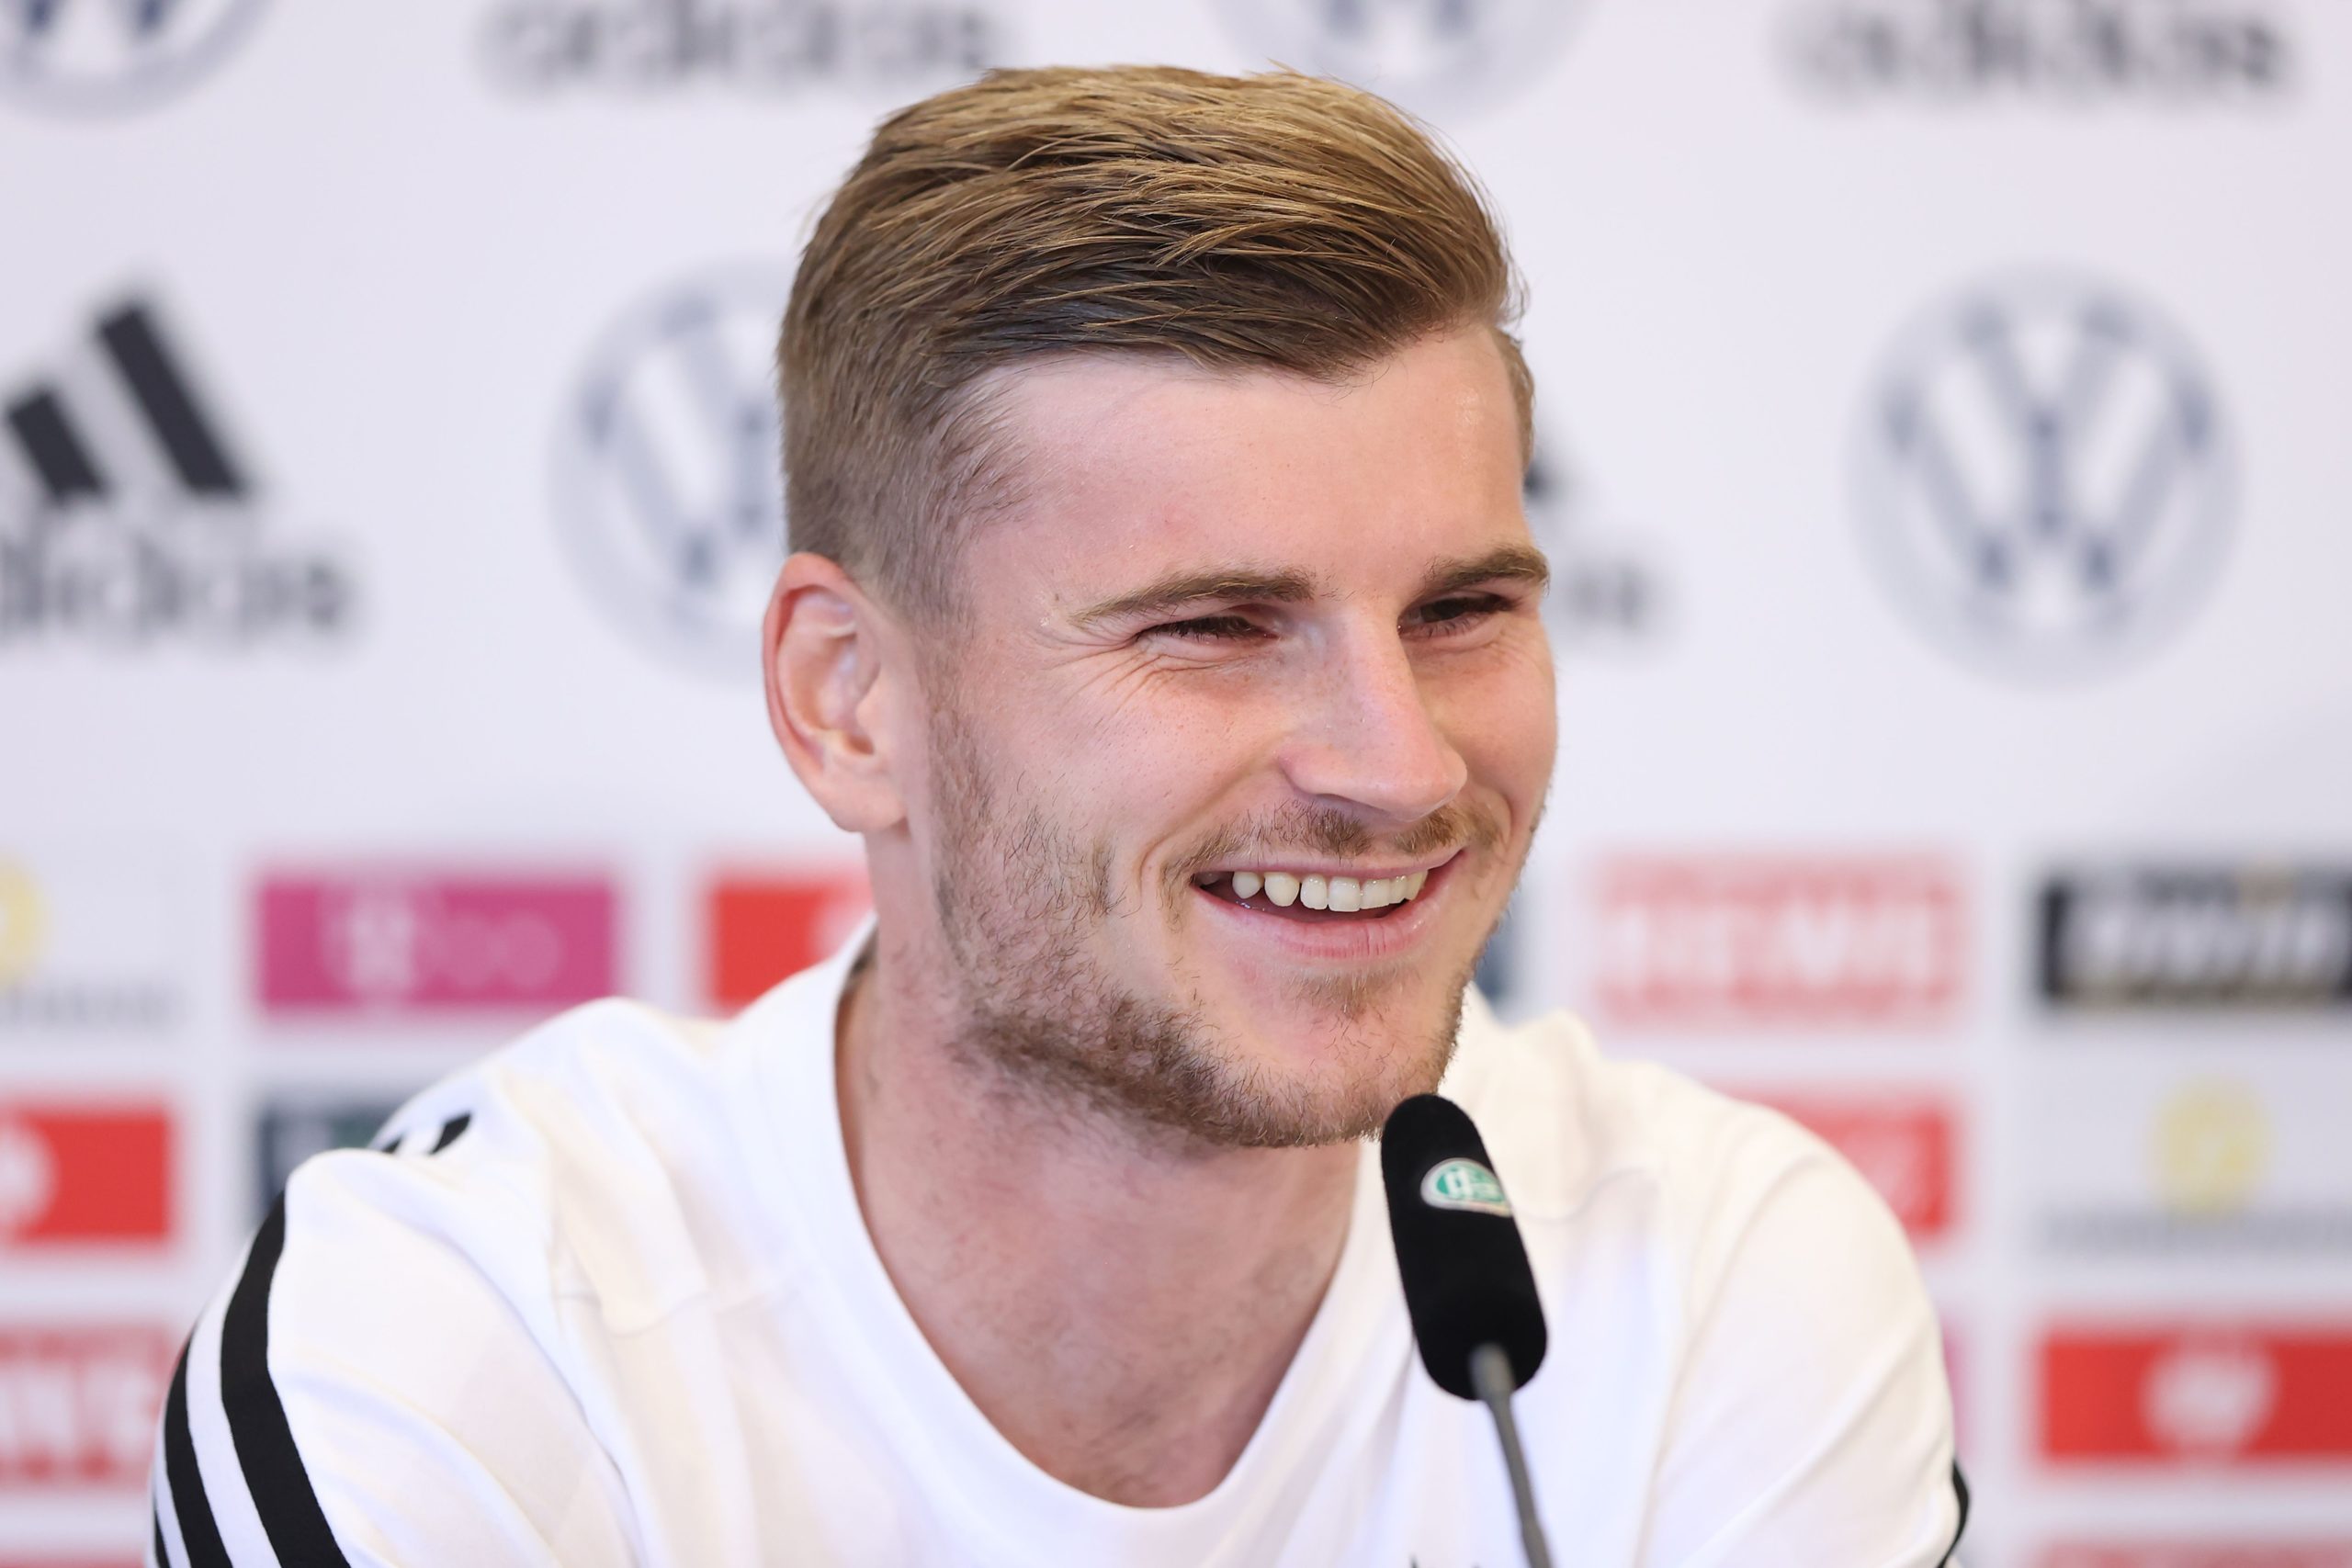 Timo Werner Girlfrienf